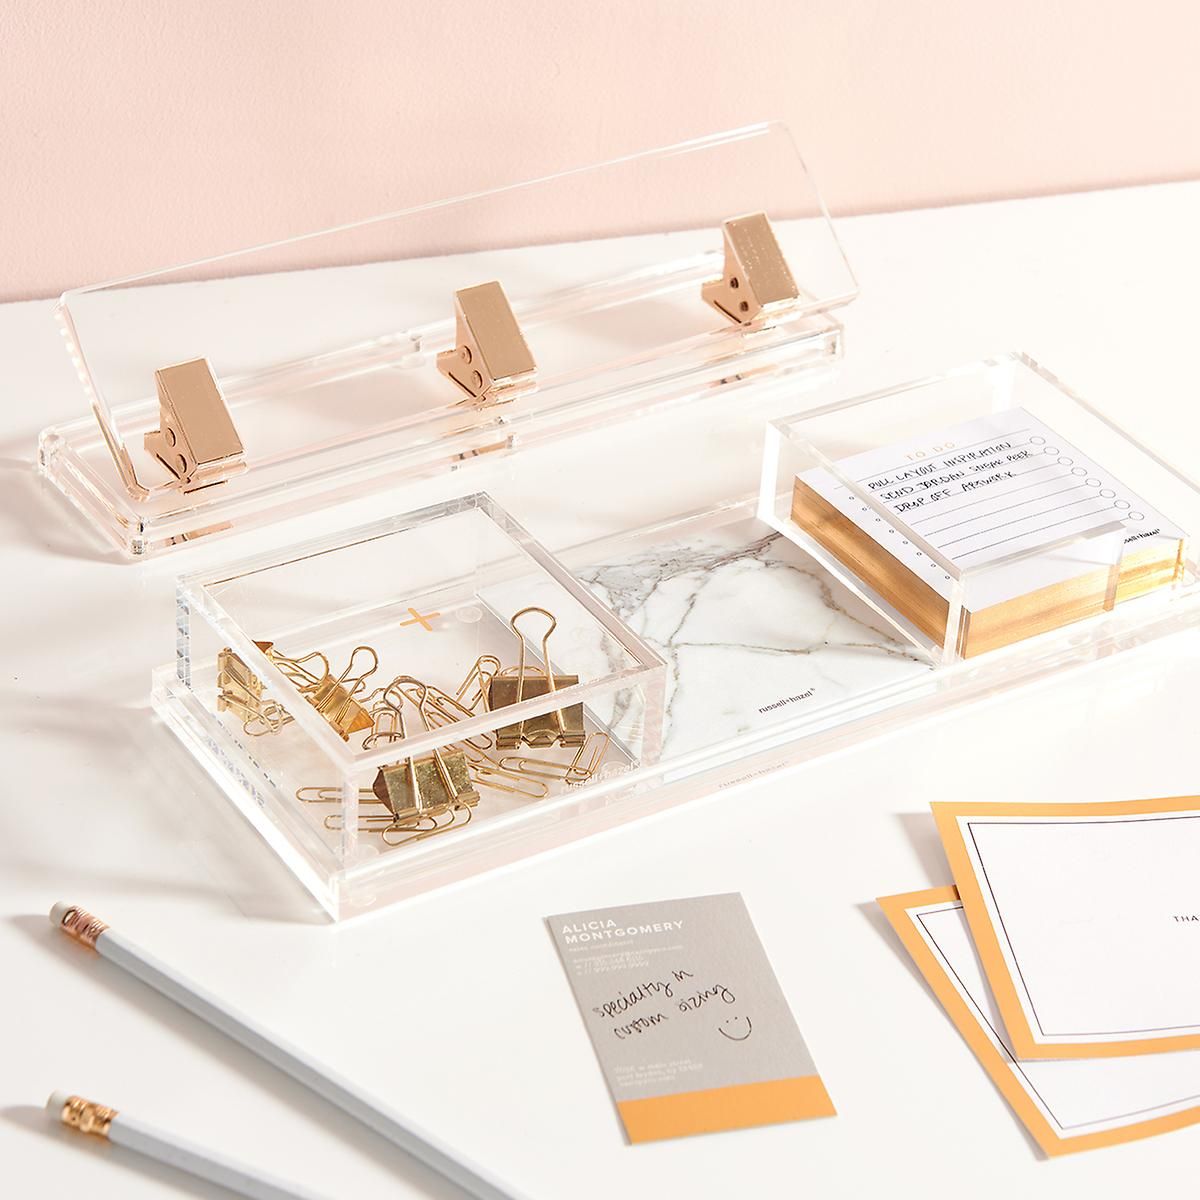 Russell + Hazel Acrylic Box with Lid | The Container Store